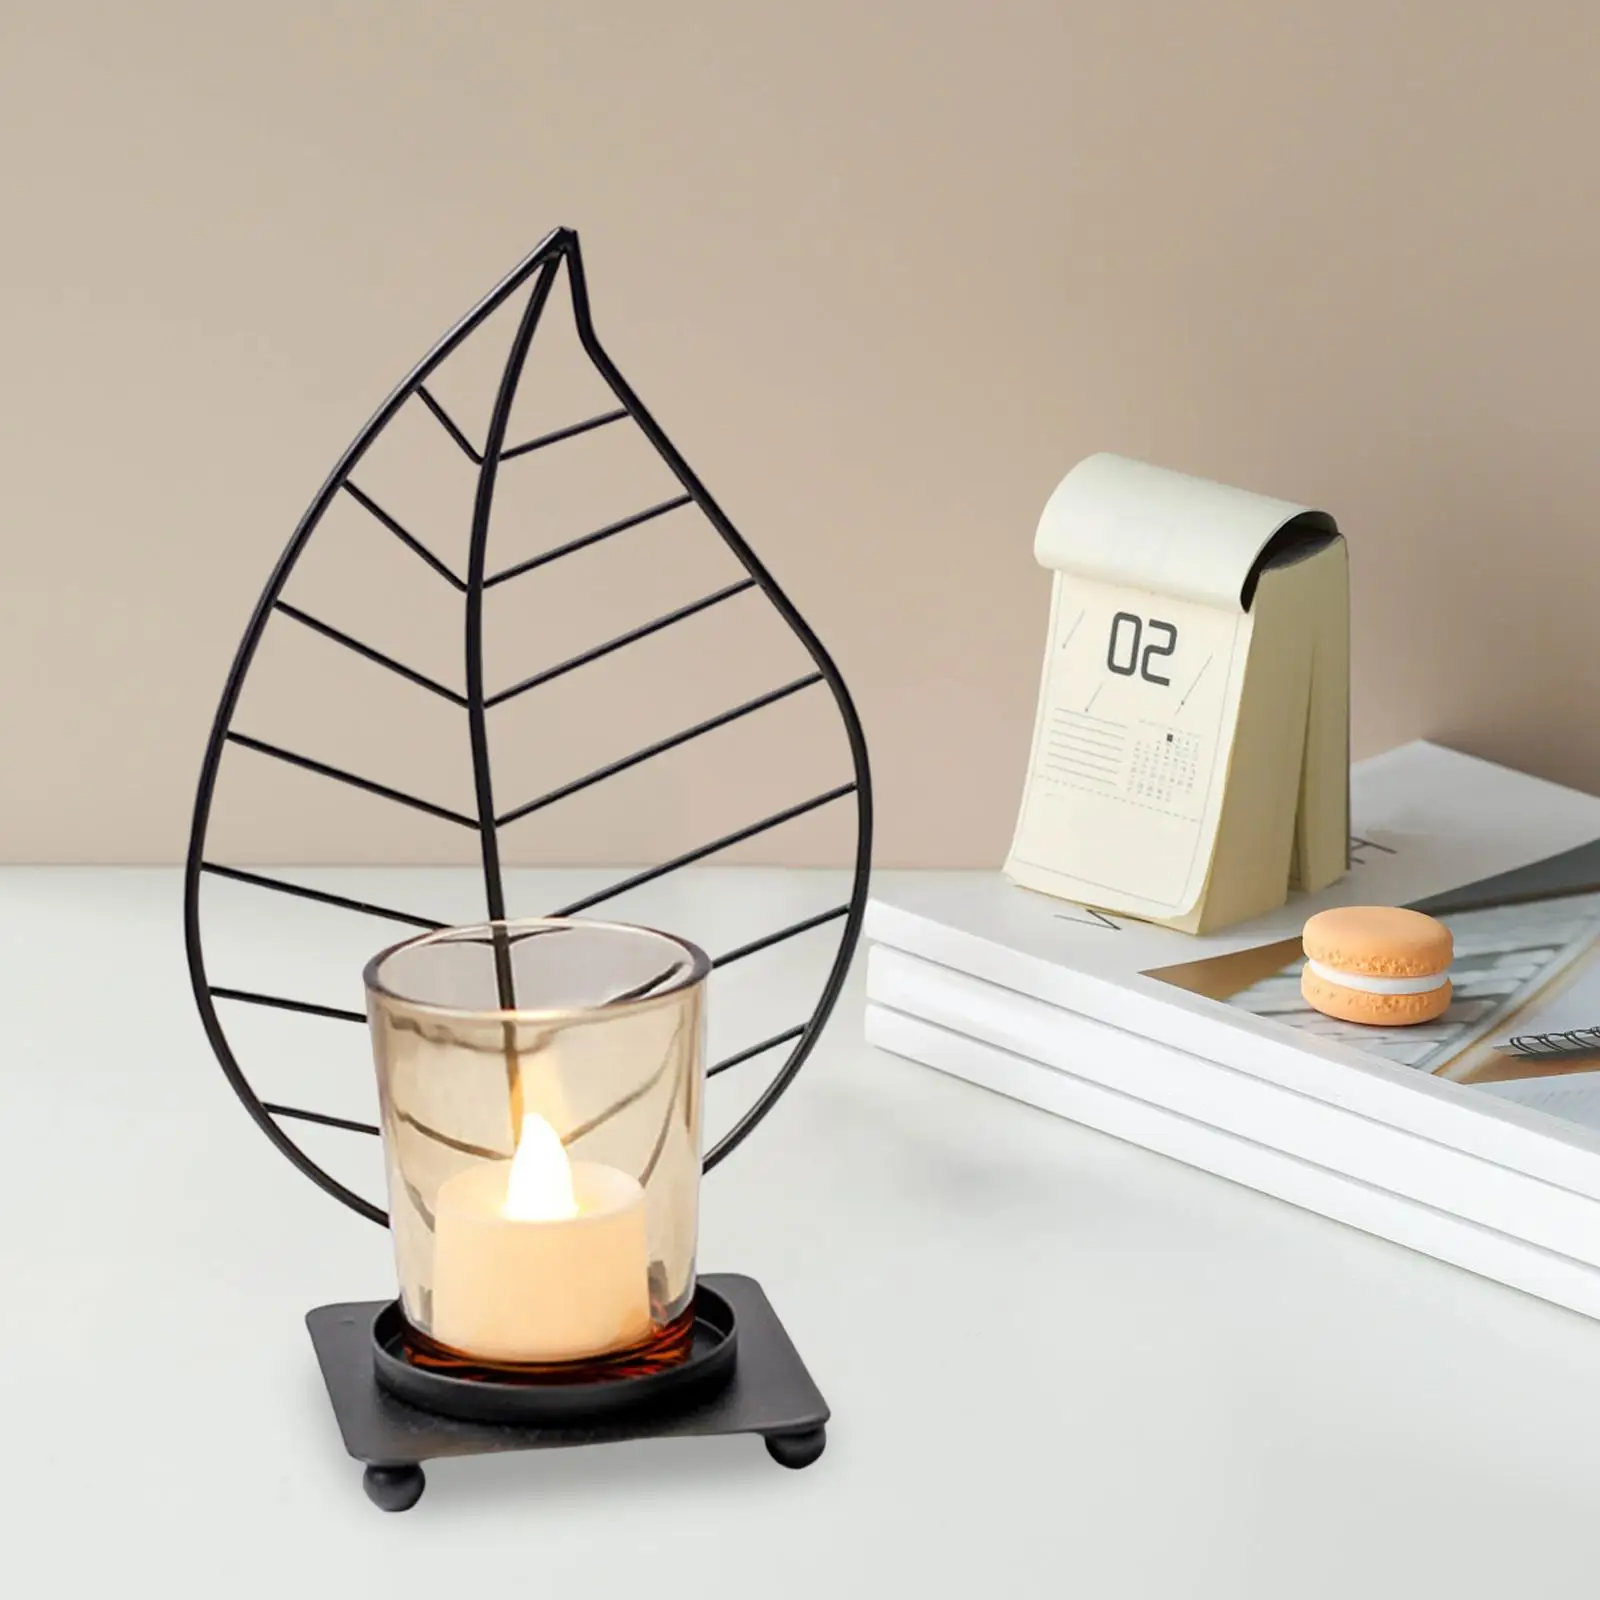 Multifunctional Metal Leaves Candlestick Table Centerpiece Pillar Candles Tealight Candleholder for Mantel Decor Dining Room